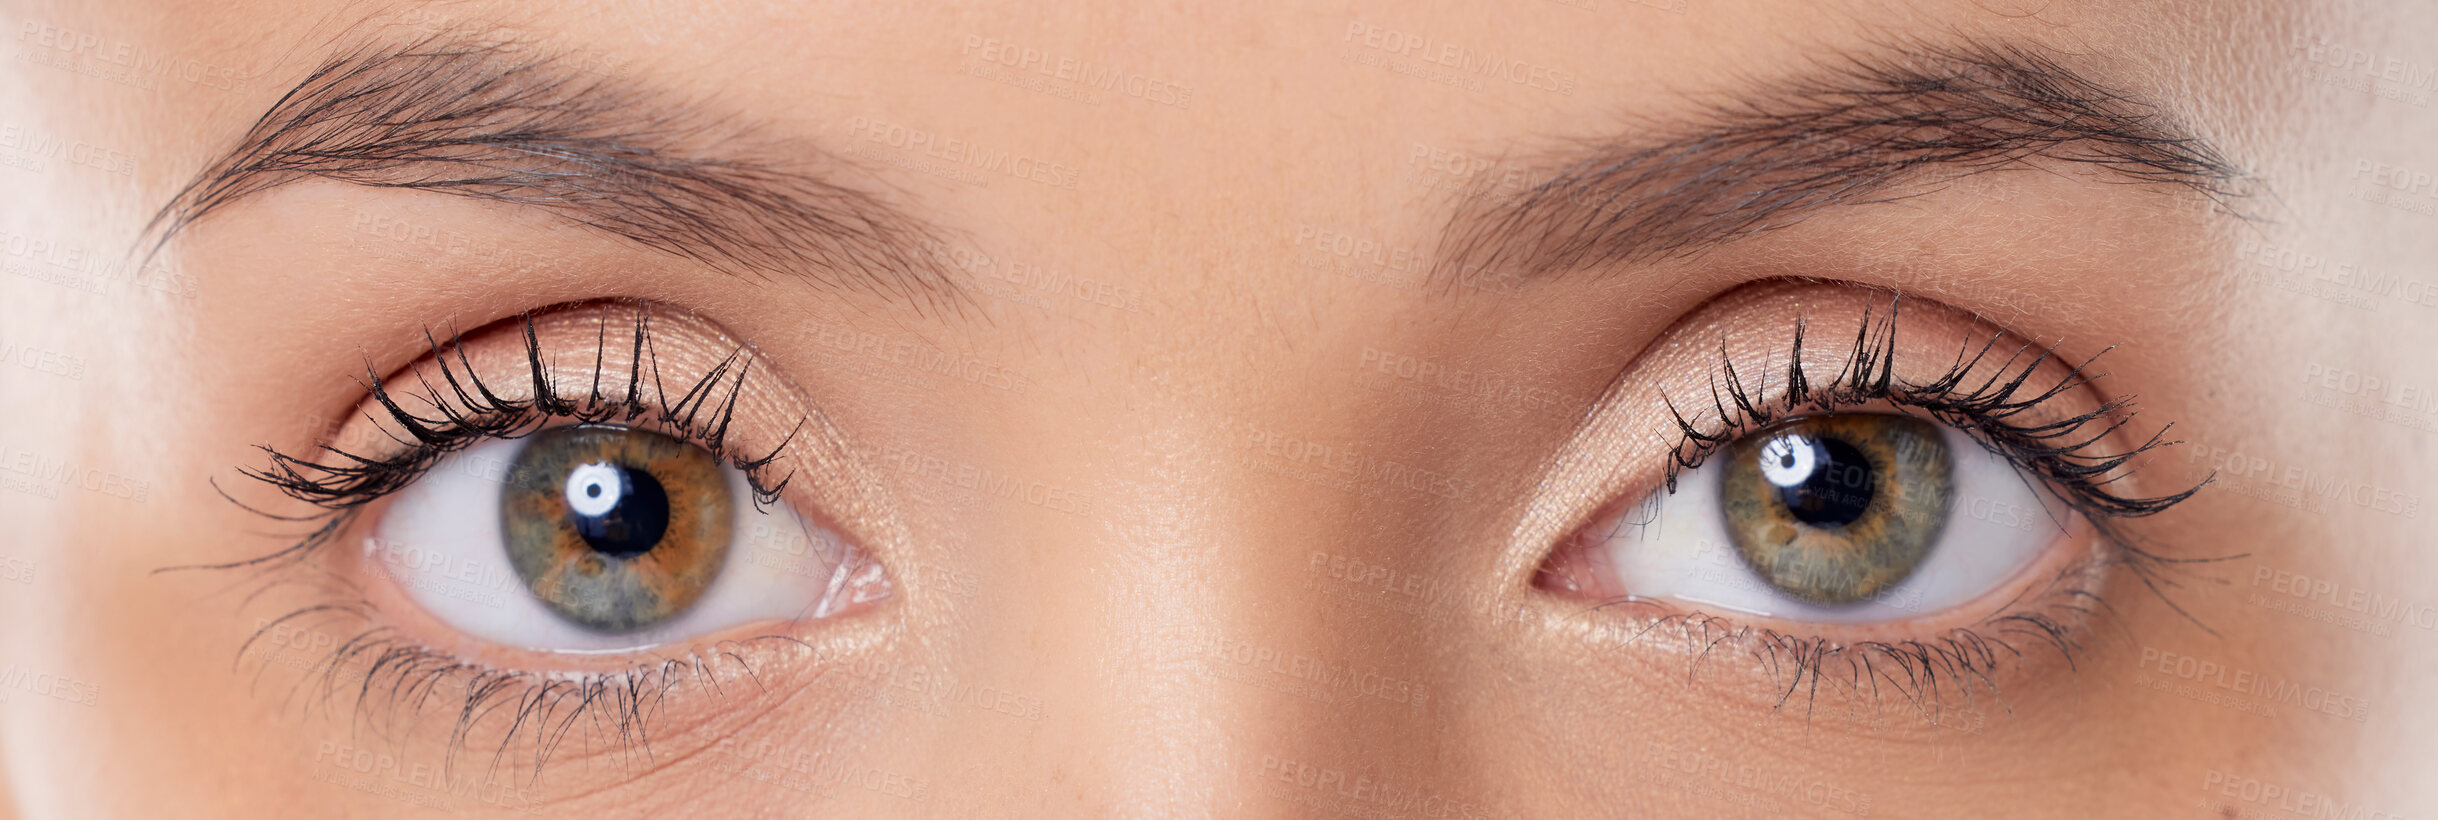 Buy stock photo Closeup shot of a young woman’s eyes against a grey background